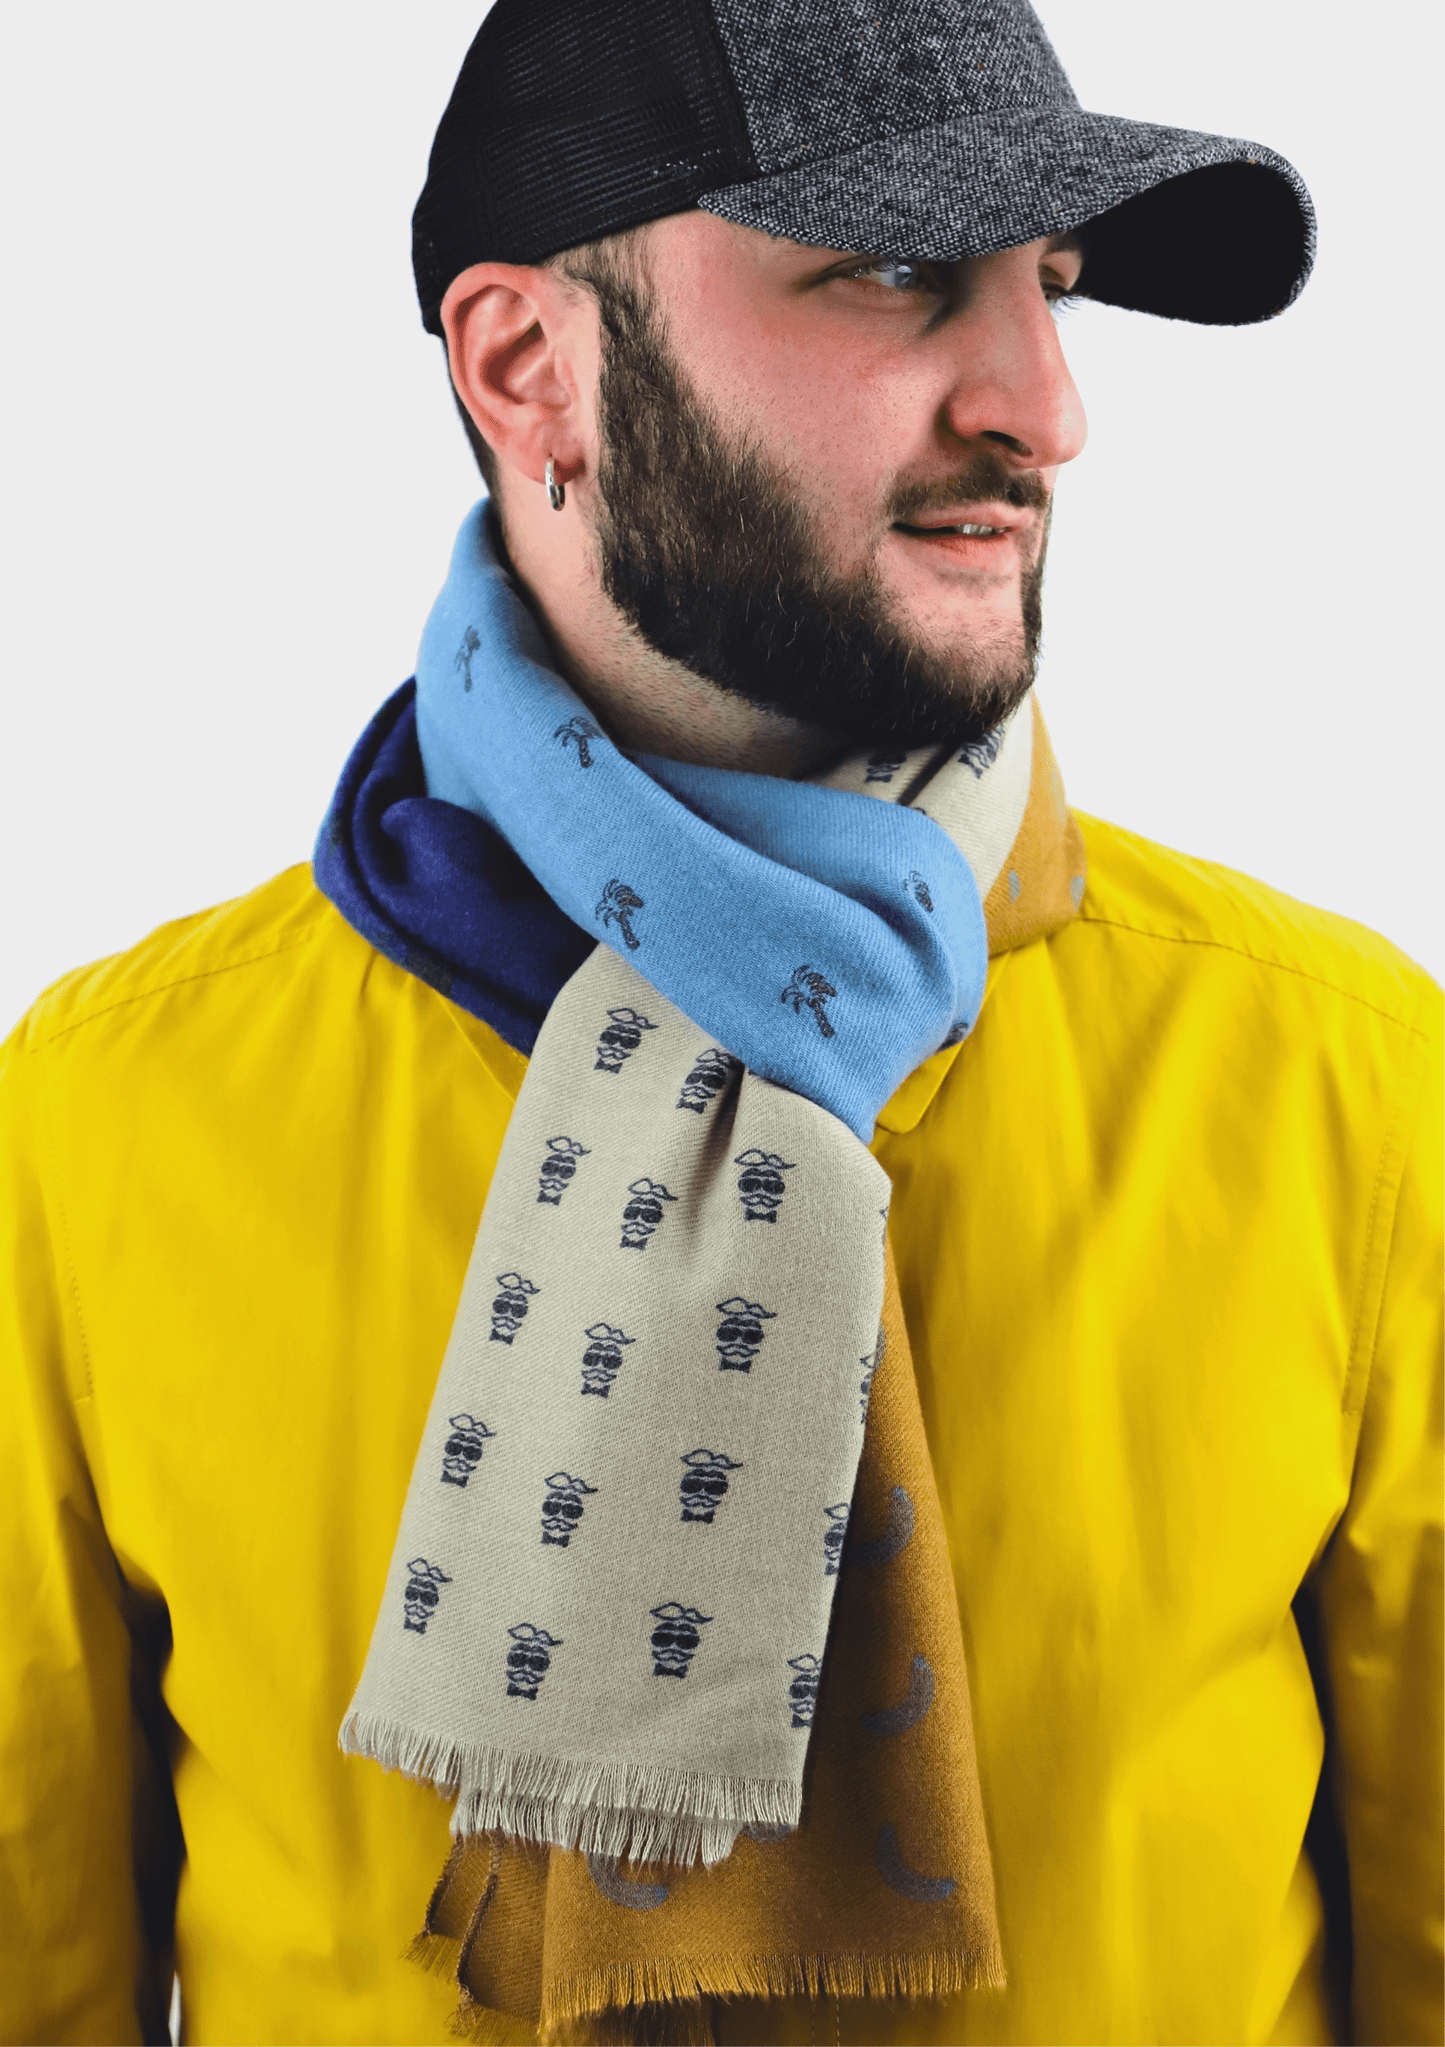 This is a soft and warm cotton scarf for men in vintage style in modern bananas, palms and moustache print in beige, brown, green and blue made of a special cotton blend that gives you a wonderful cashmere-like feeling without hurting animals. It is a vegan scarf certified by PETA and a perfect gift idea for men.